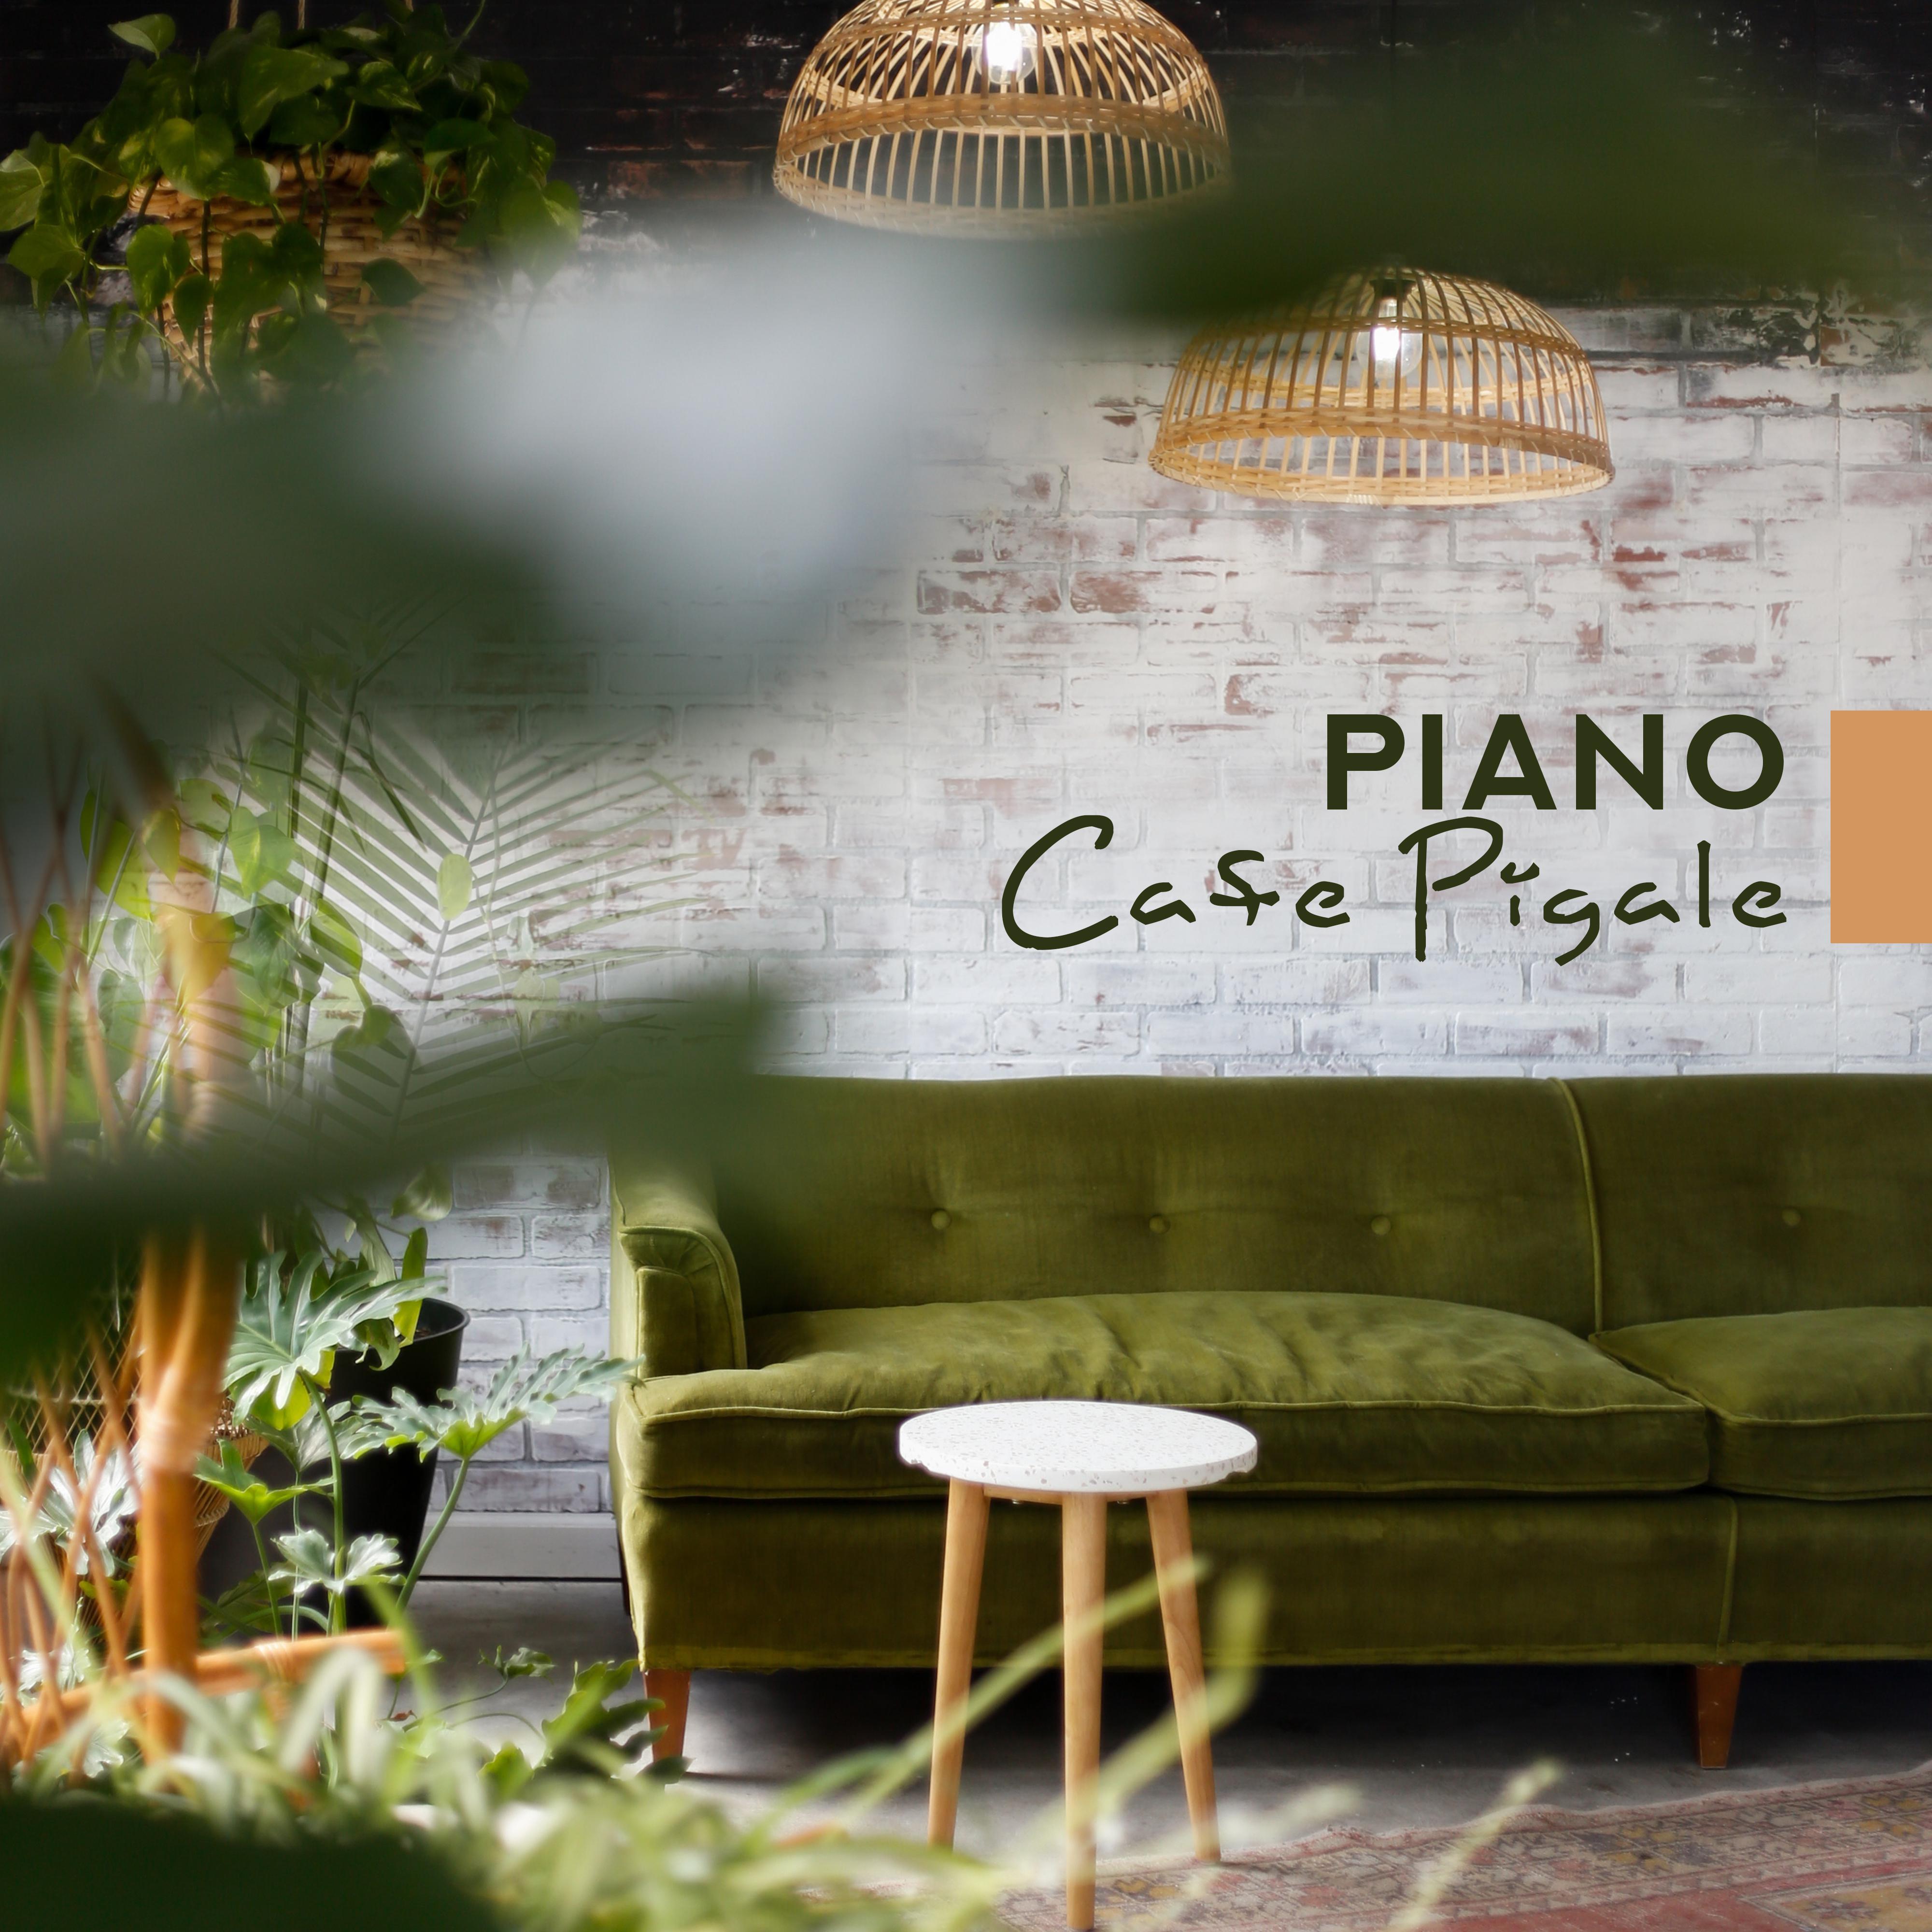 Piano Cafe Pigale: 2019 Piano Jazz Music for Time Spending with Freinds in Cafe, Tasting Good Desserts & Drinking Coffee